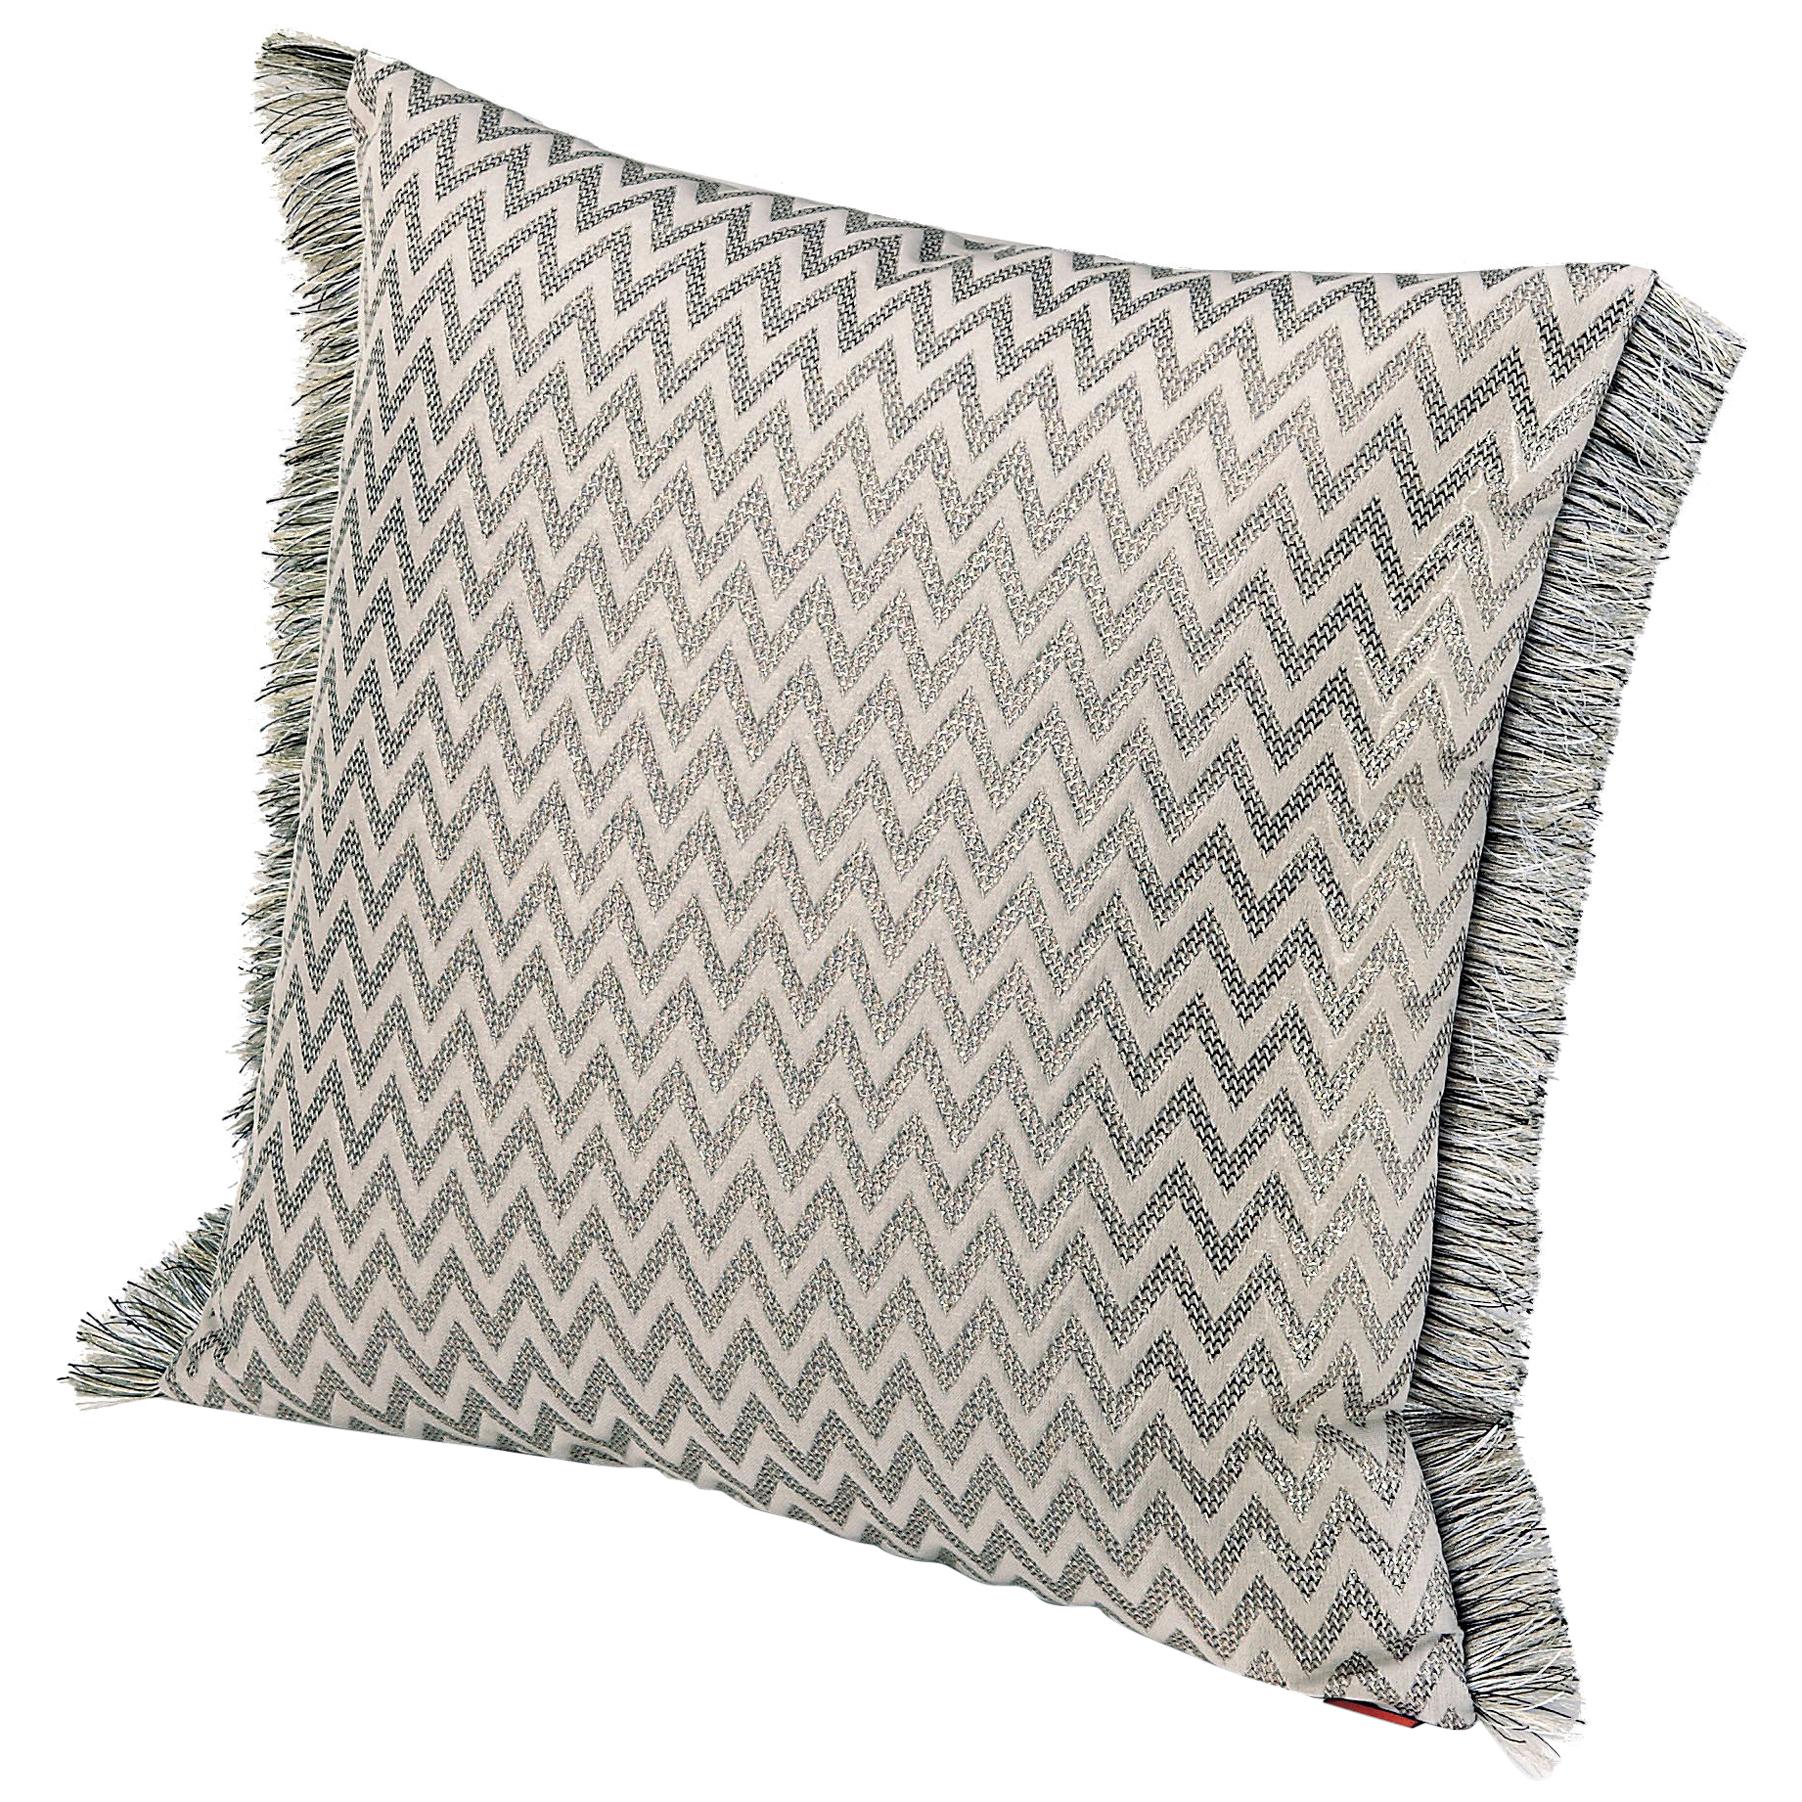 Missoni Home Stanford Cushion in Ivory & Silver Chevron Print with Fringe Trim For Sale